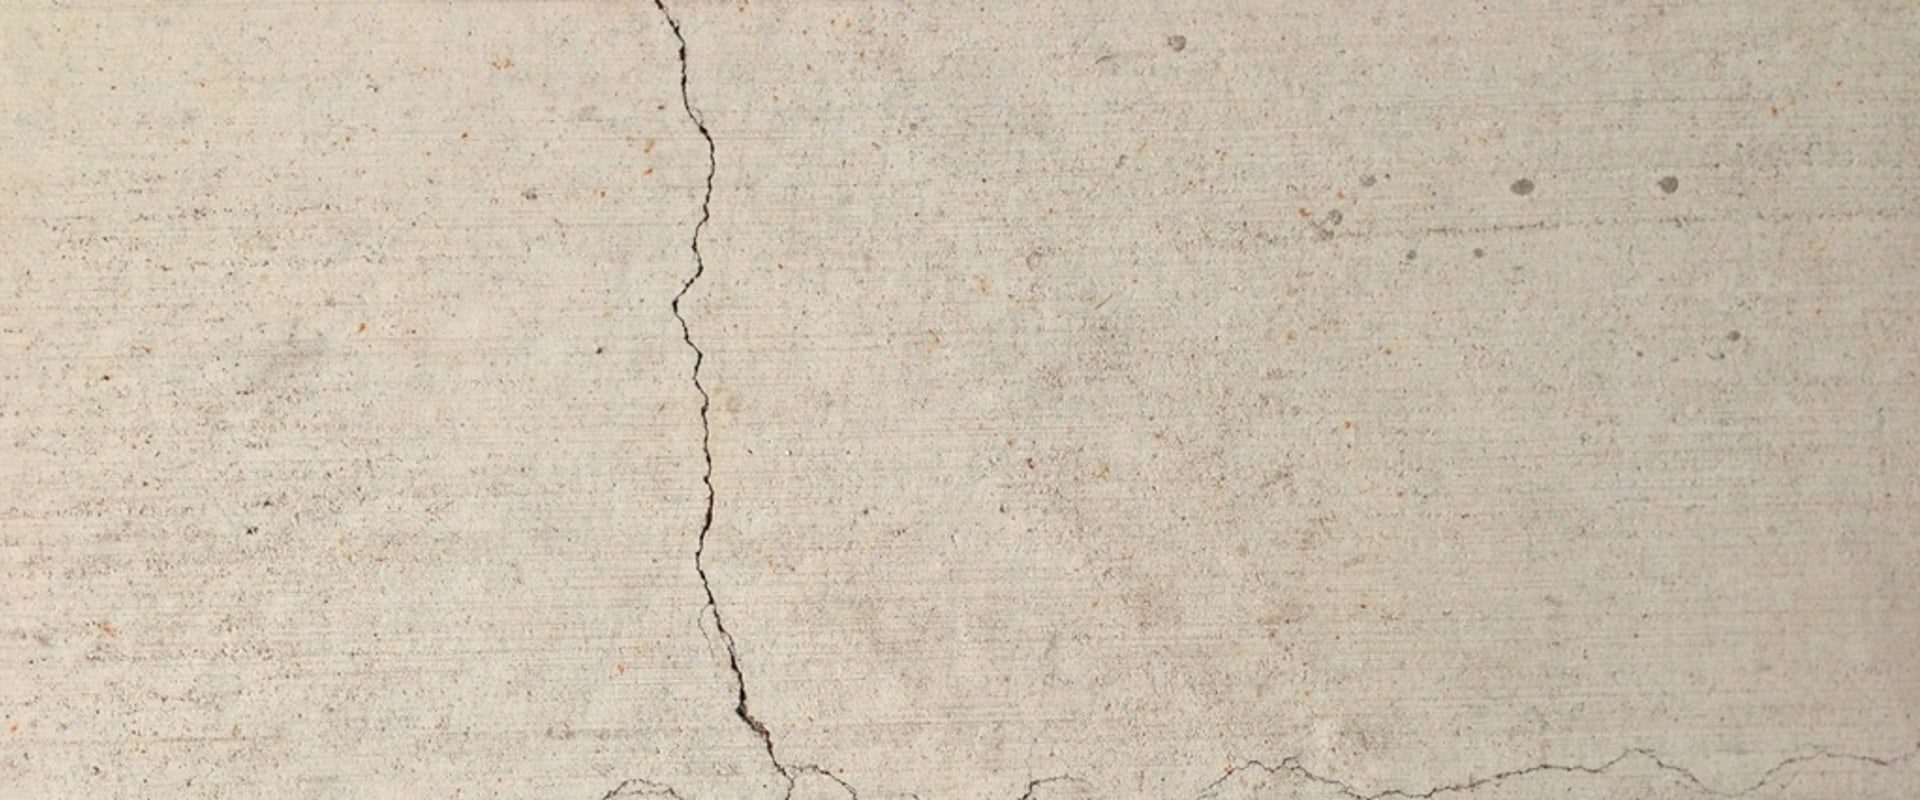 Why Cracks in Concrete Should Not Be Ignored